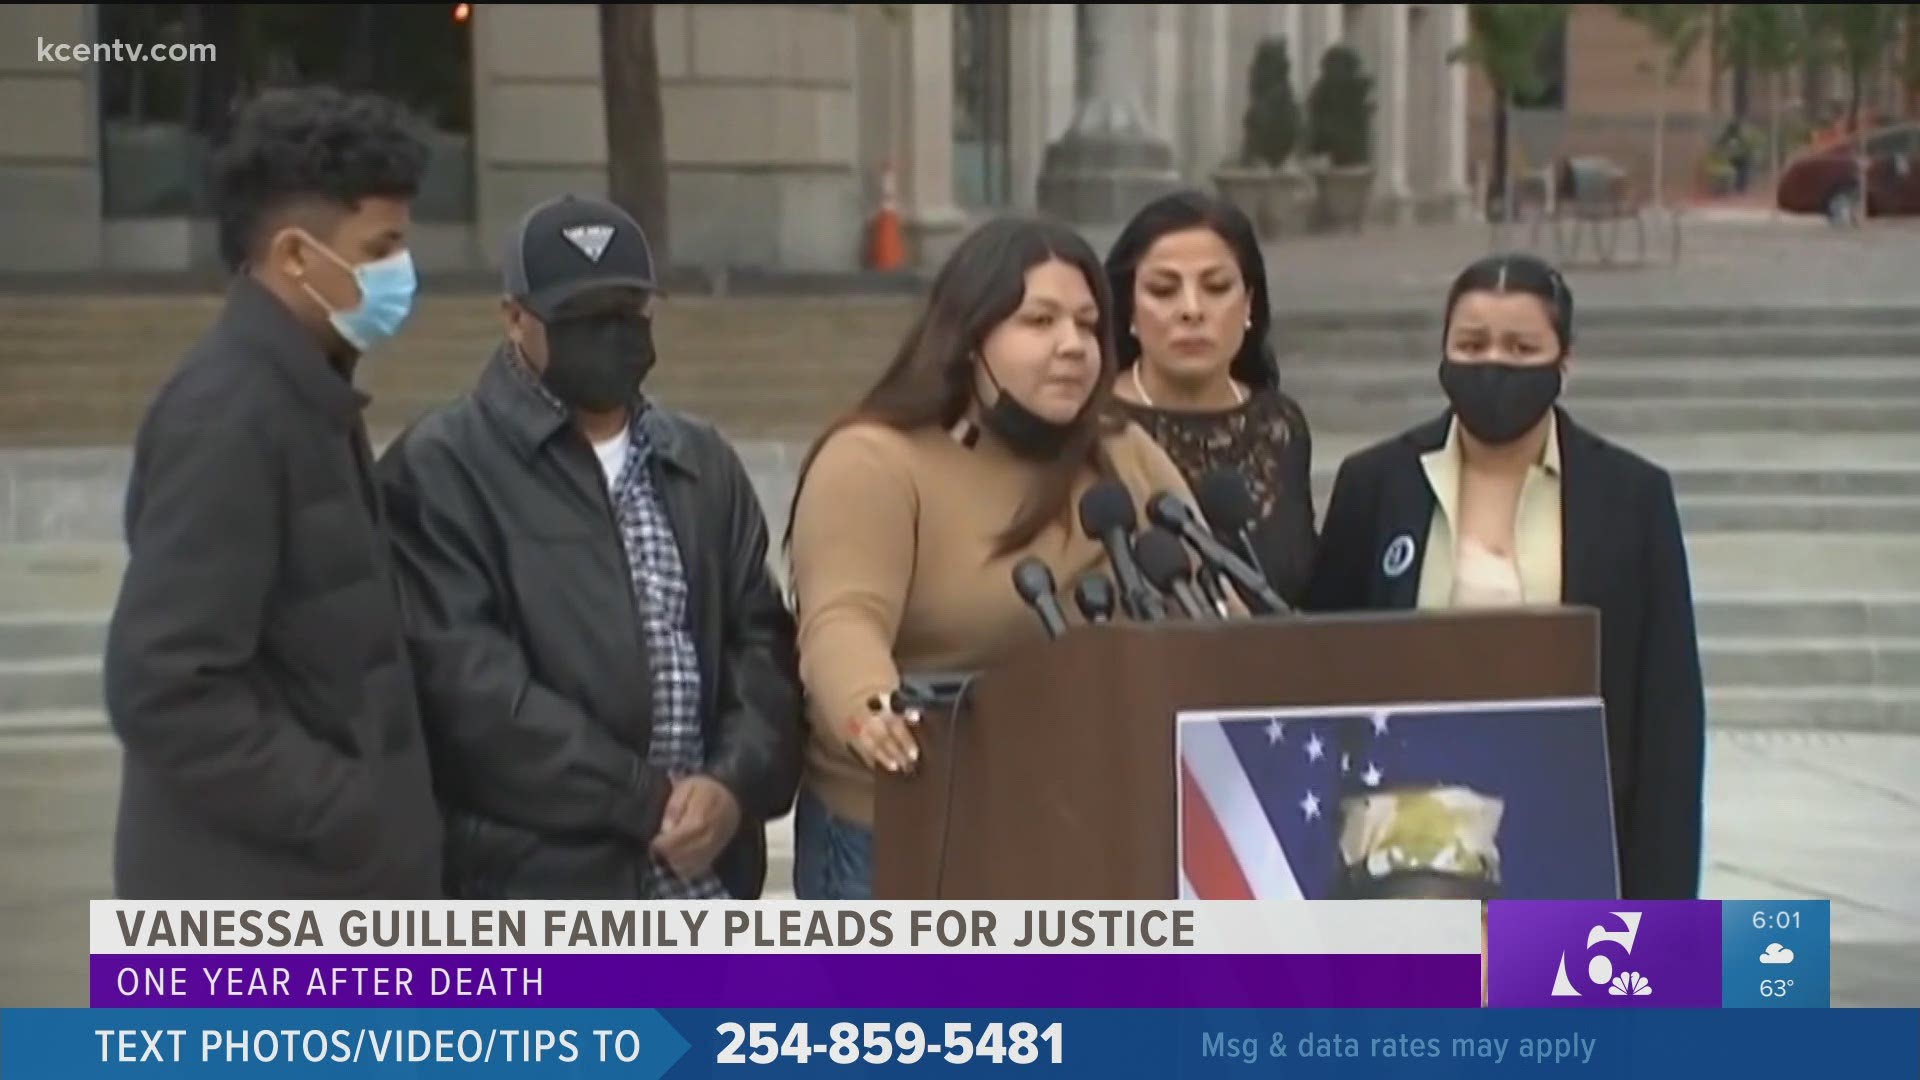 On the anniversary of her sister's death, Lupe Guillen pleaded for President Biden to get behind the I Am Vanessa Guillen Act.